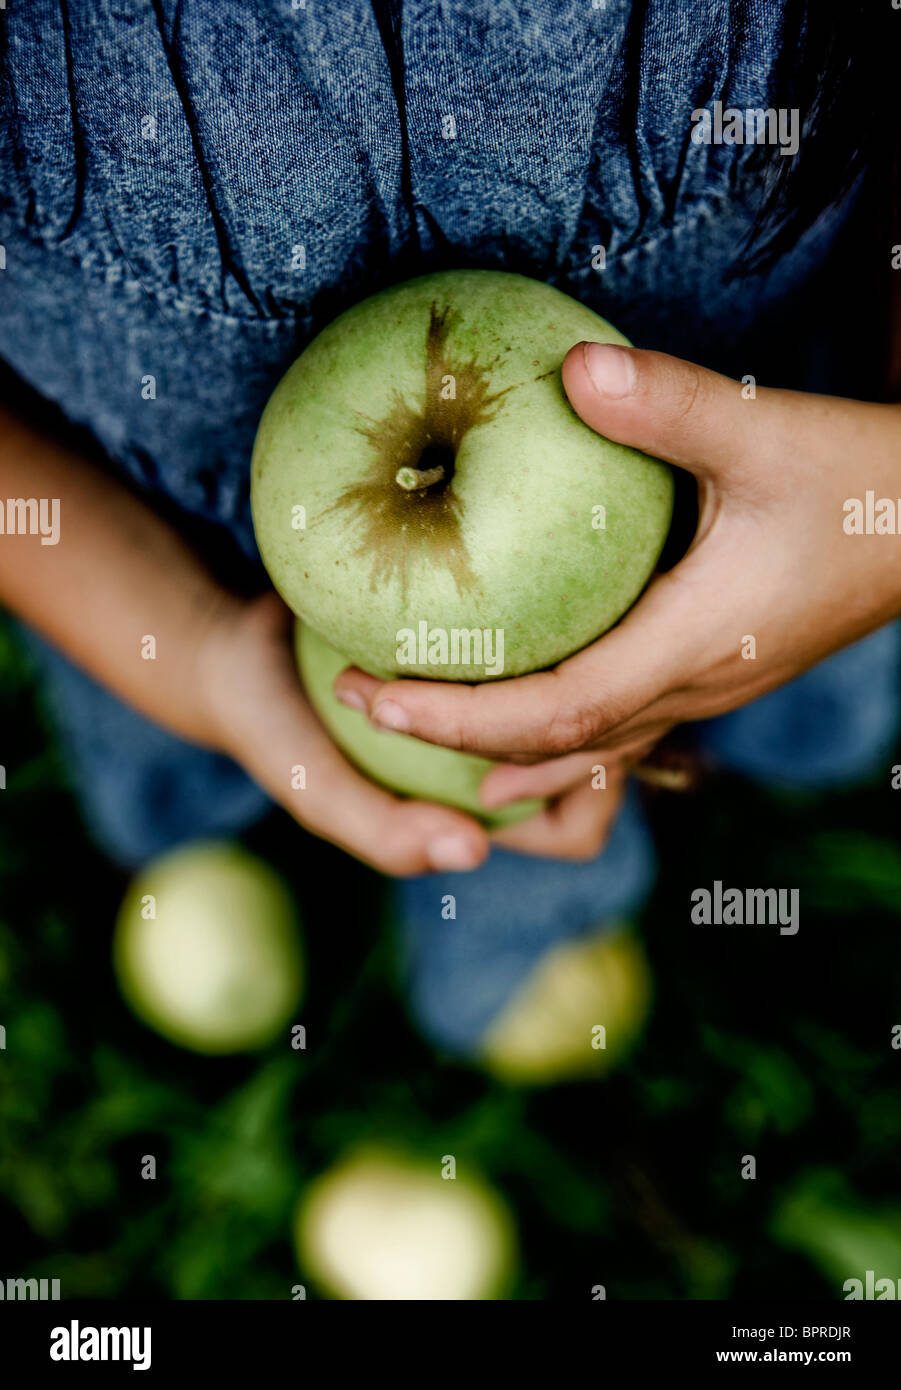 A young girl holds green apples in an apple orchard in Calhoun County, Illinois on September 28, 2008. Stock Photo